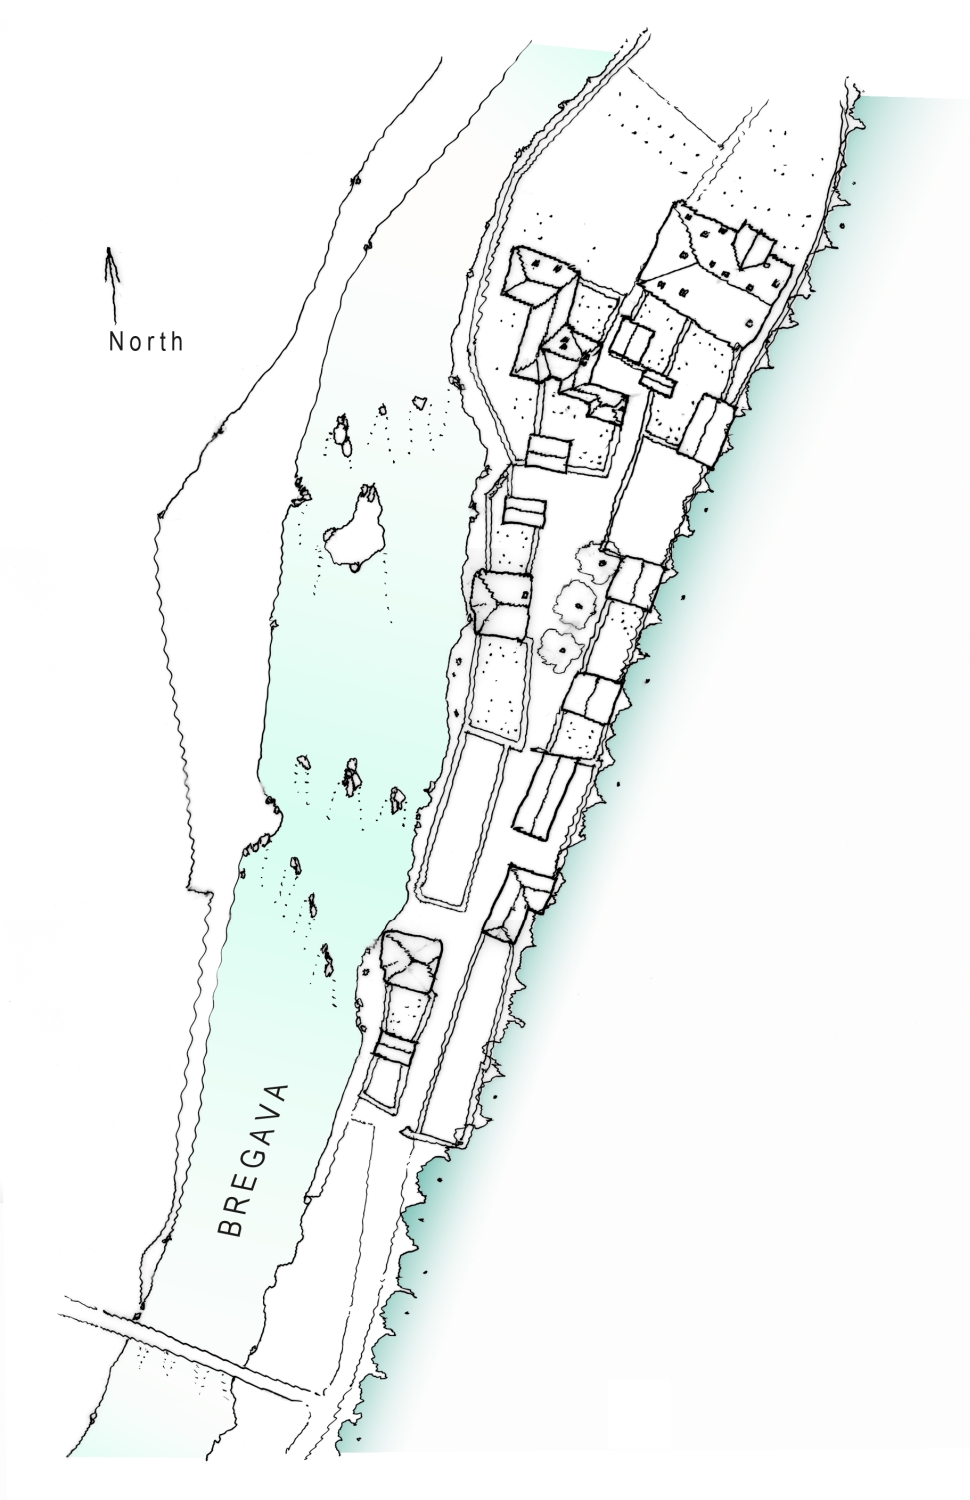 Site plan of Begovina complex, drawn in 2014 based on 1962 documents